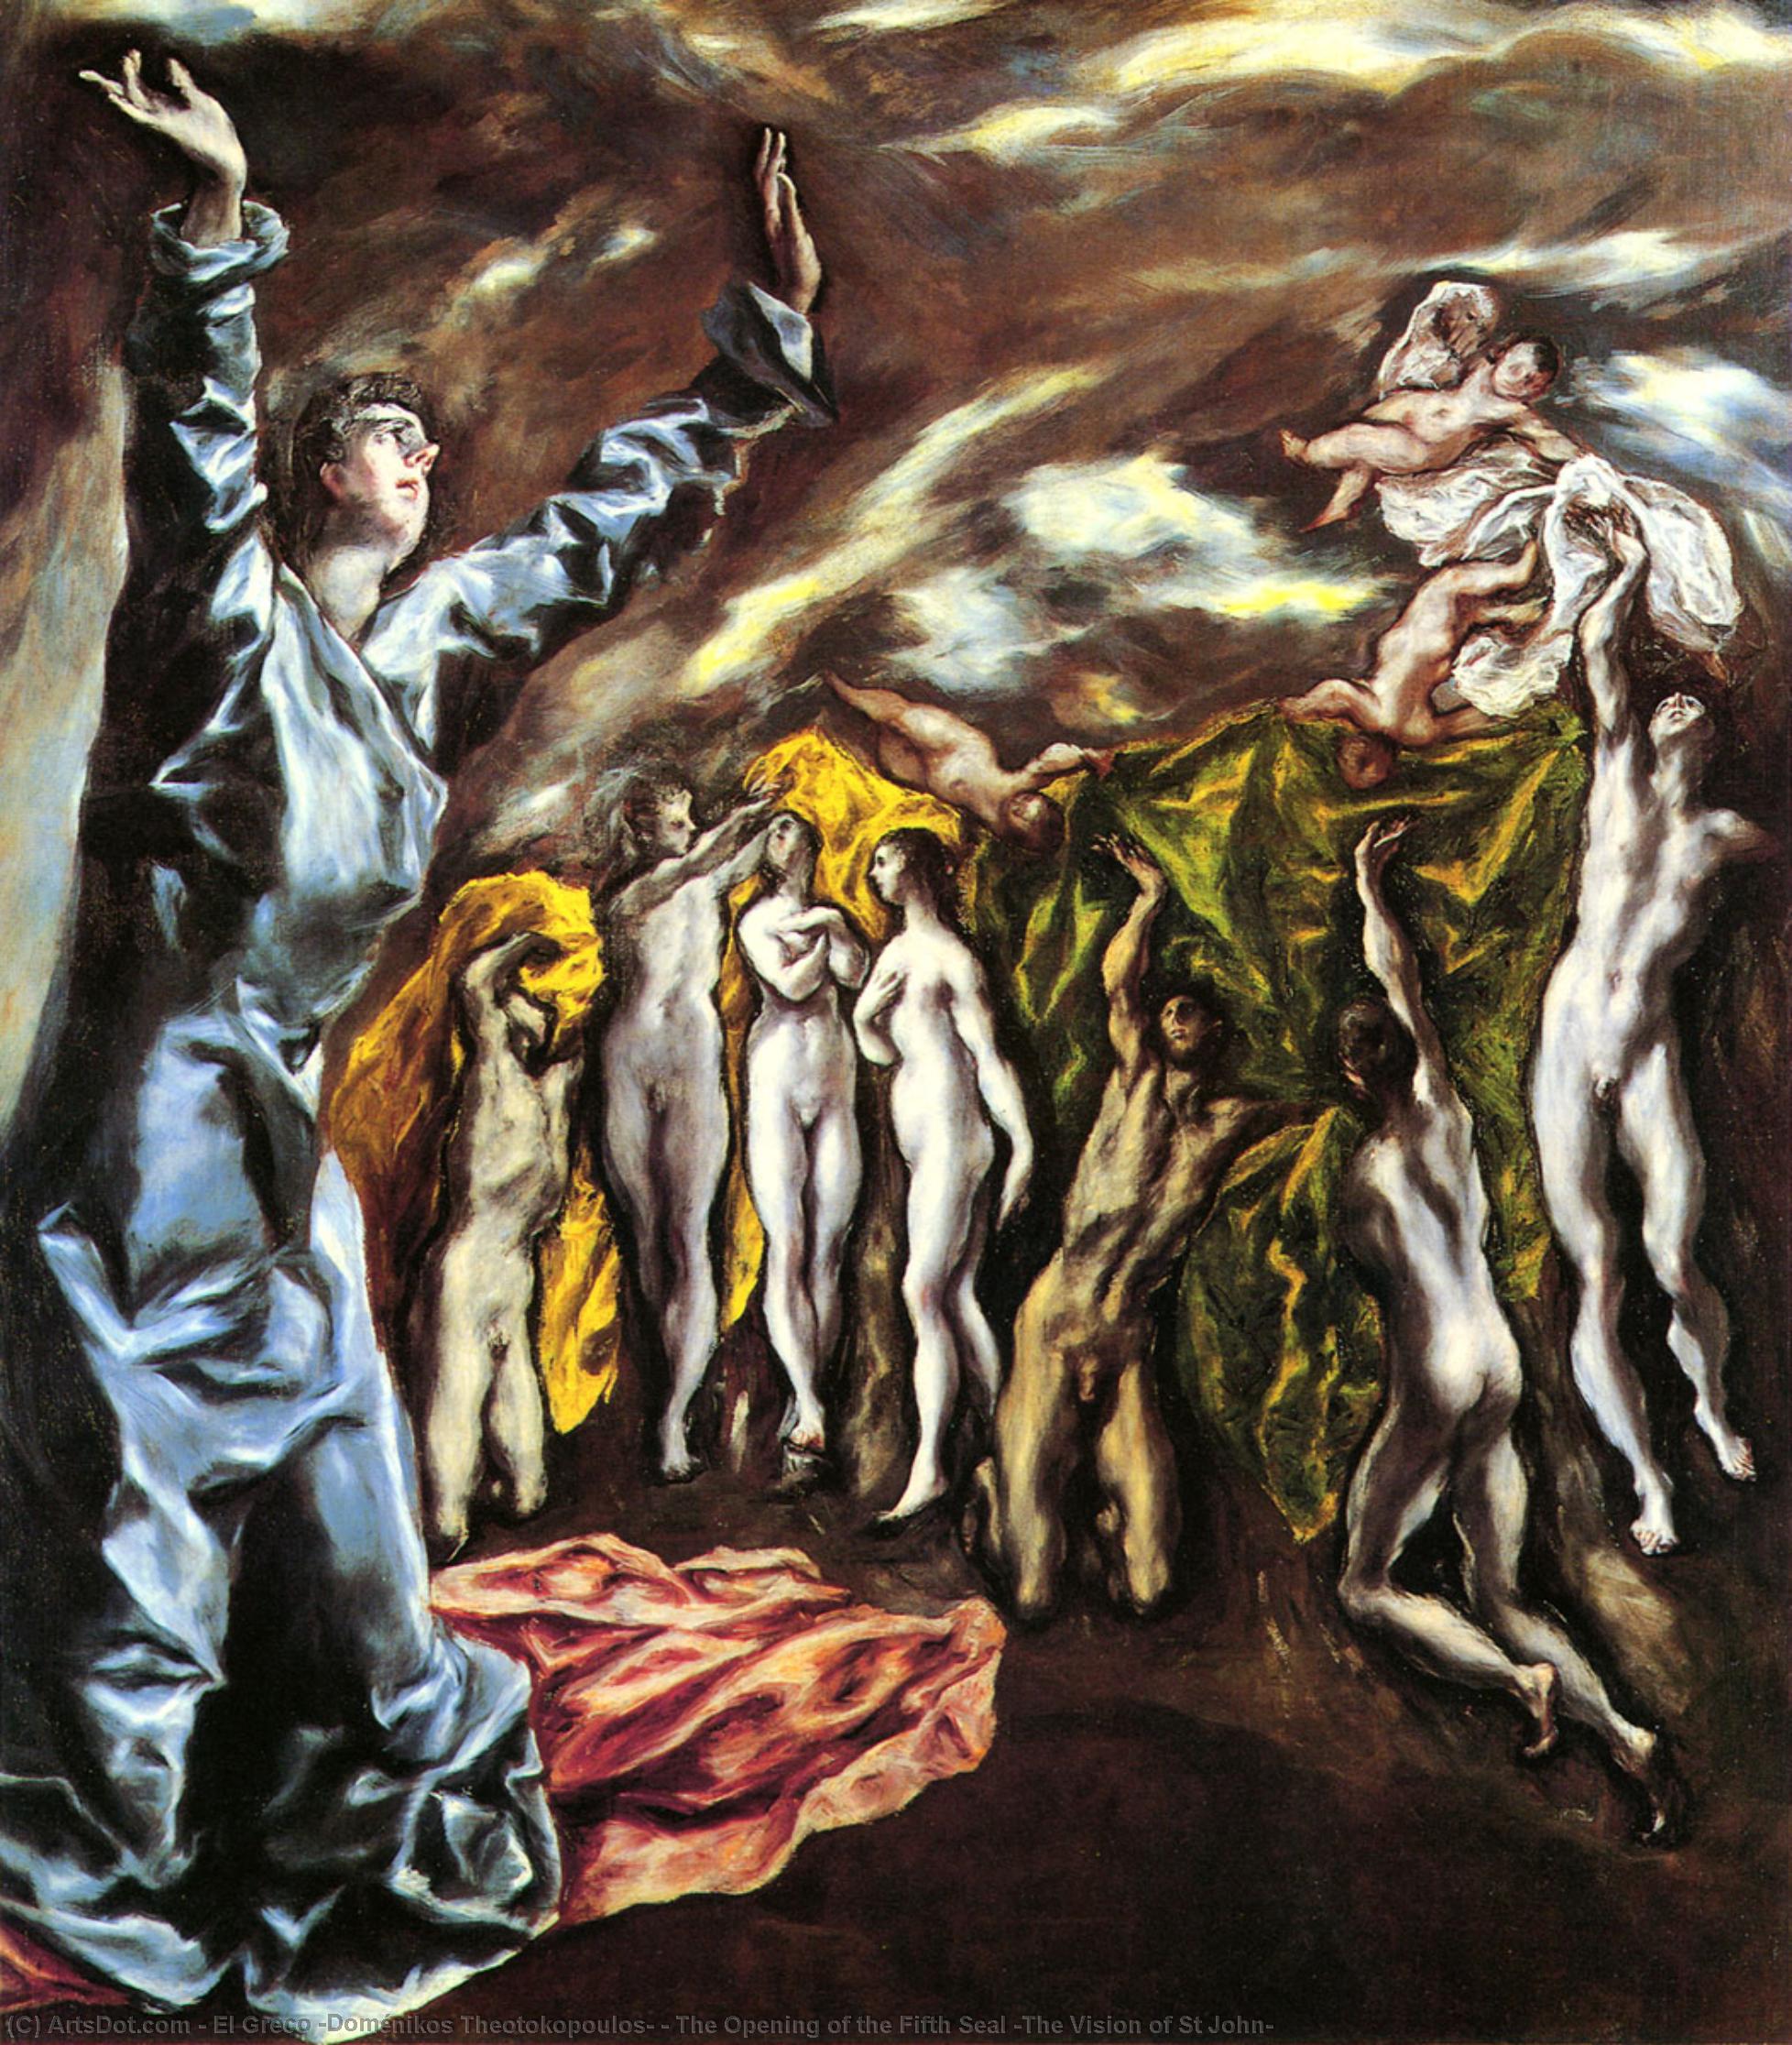 WikiOO.org - 백과 사전 - 회화, 삽화 El Greco (Doménikos Theotokopoulos) - The Opening of the Fifth Seal (The Vision of St John)